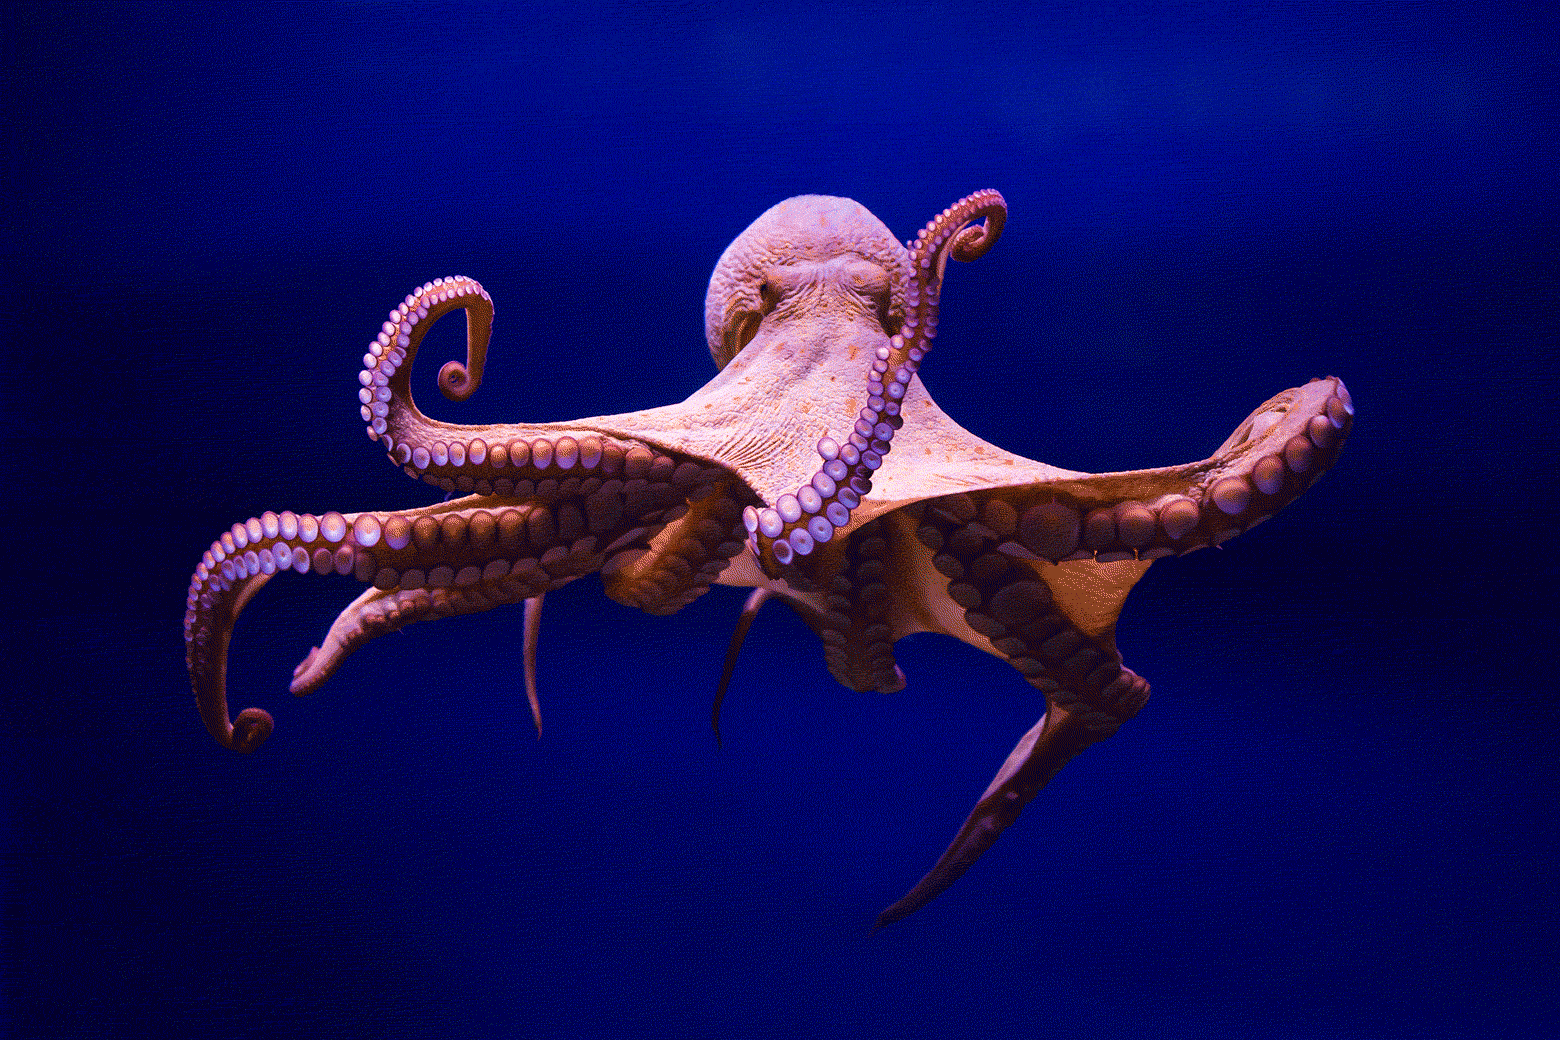 An octopus changing colors in water